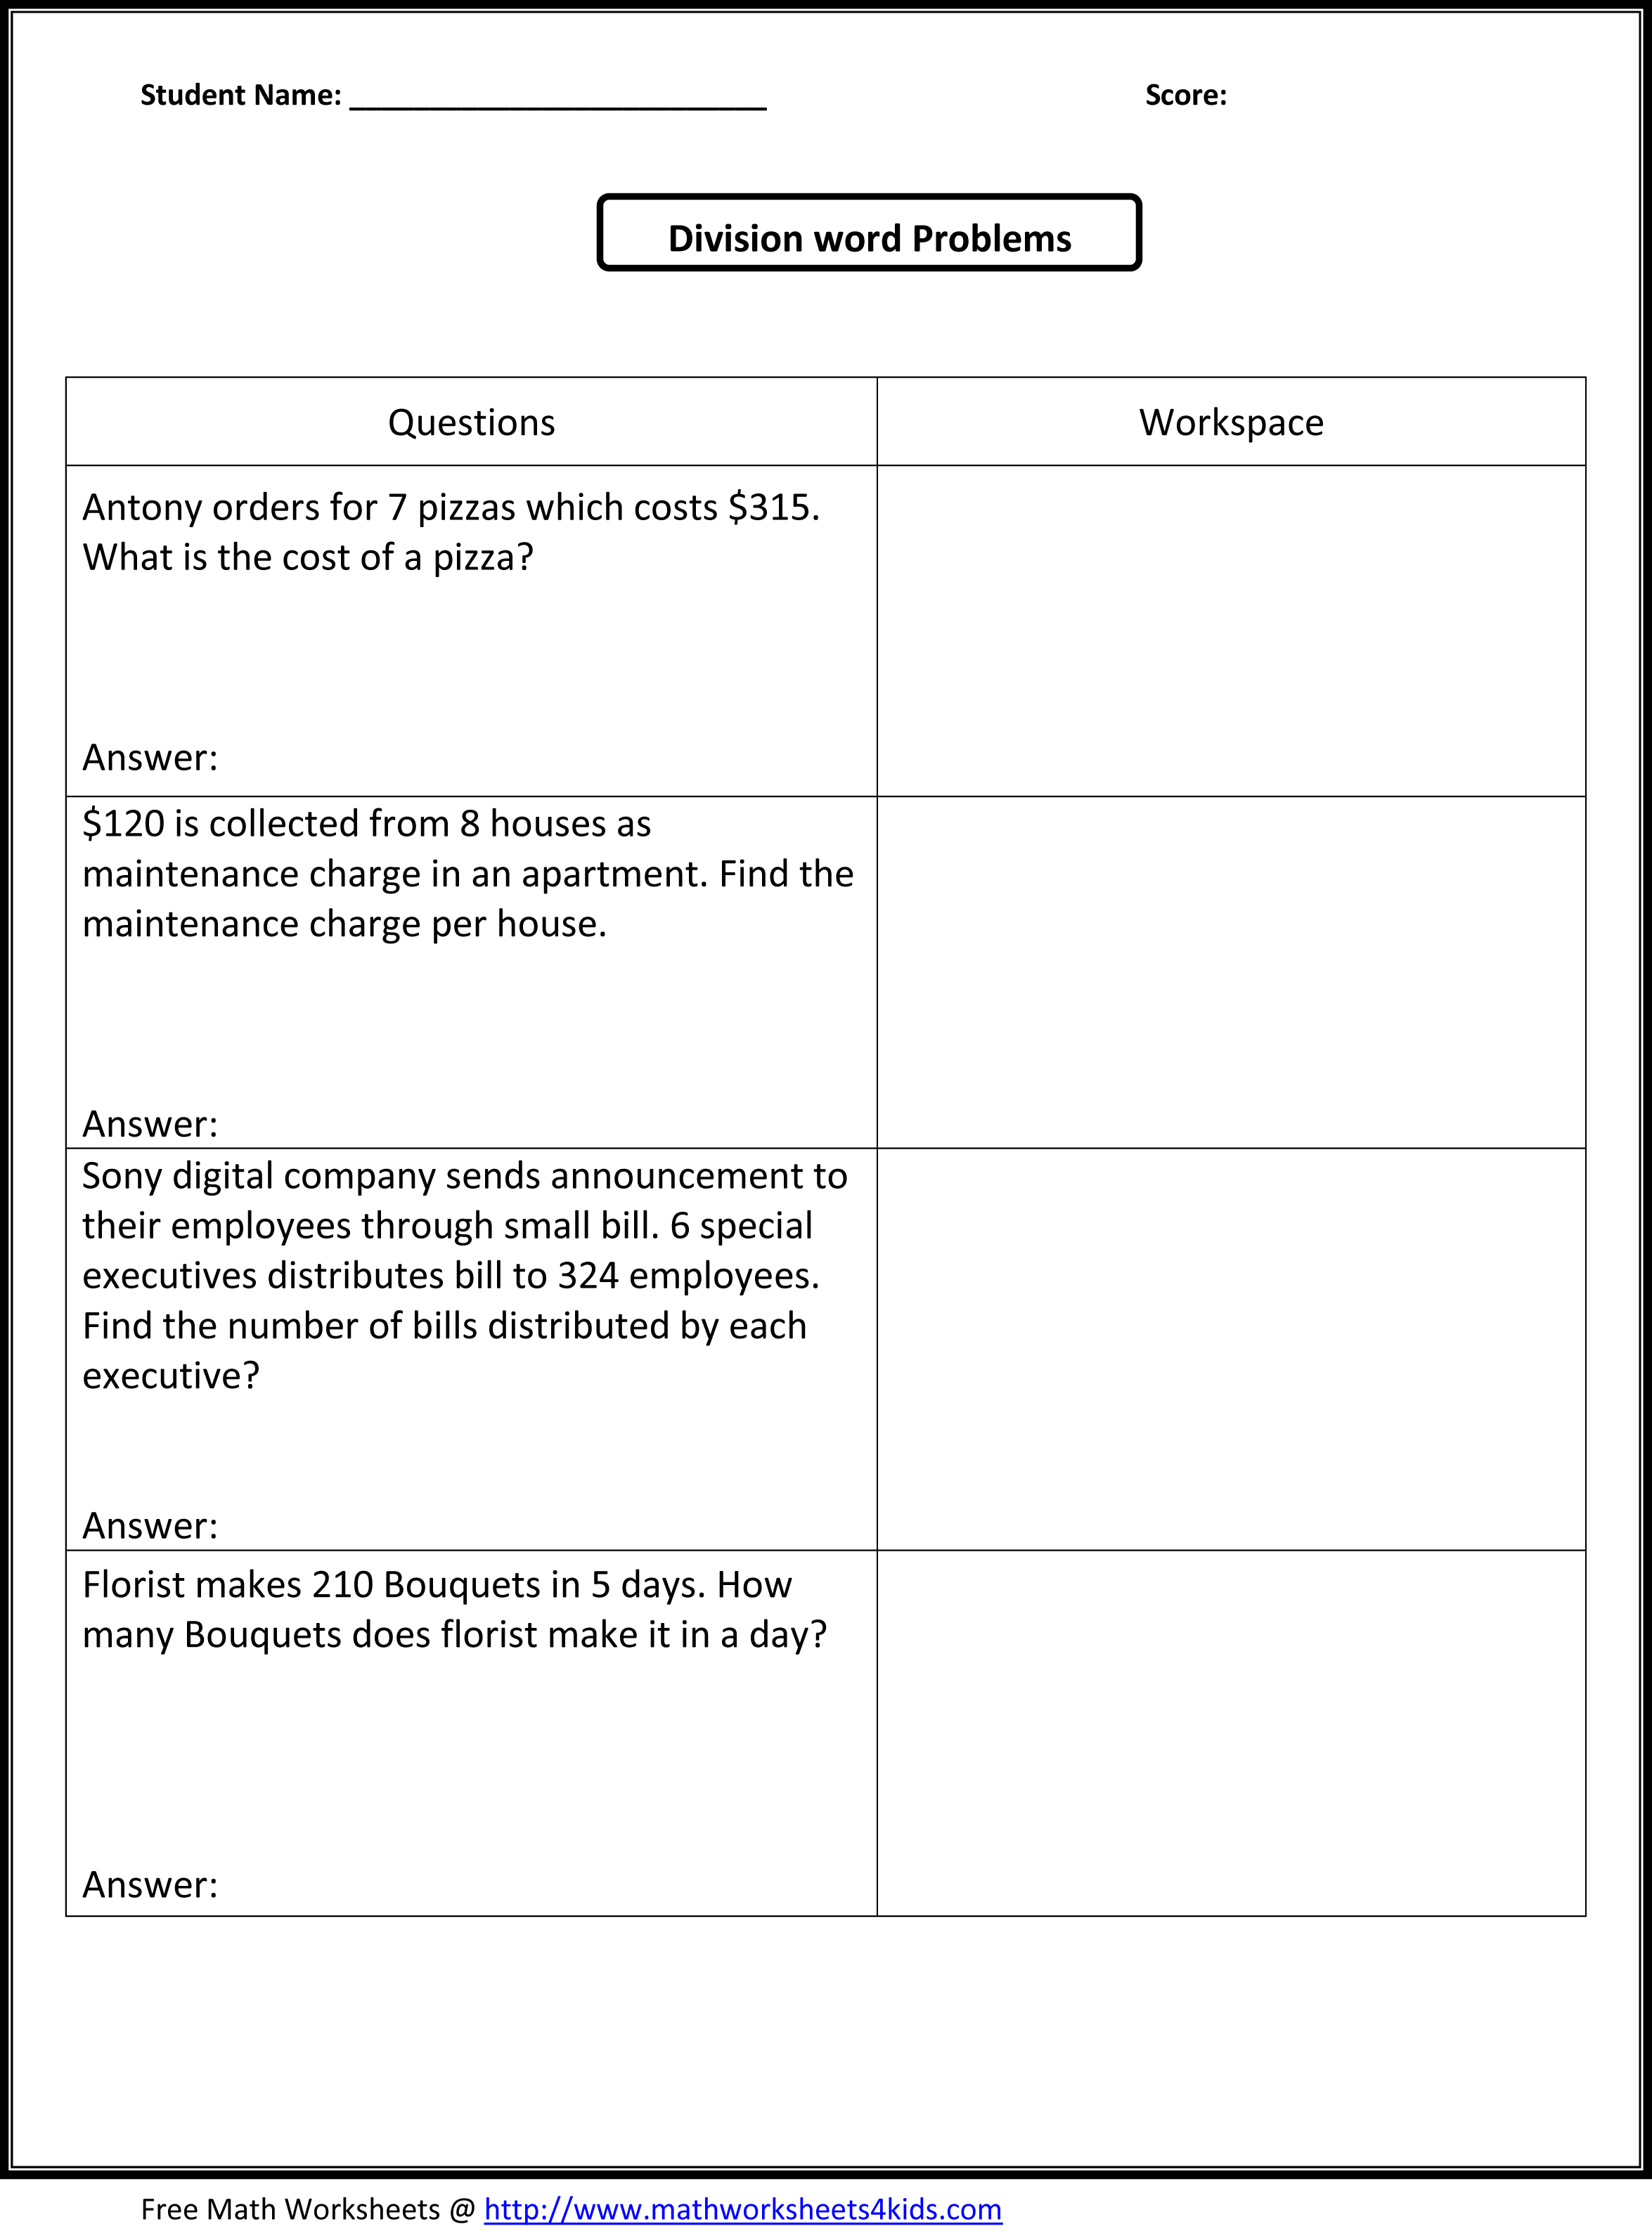 16 Best Images of 5th Step Worksheet - Fifth Grade Math ...